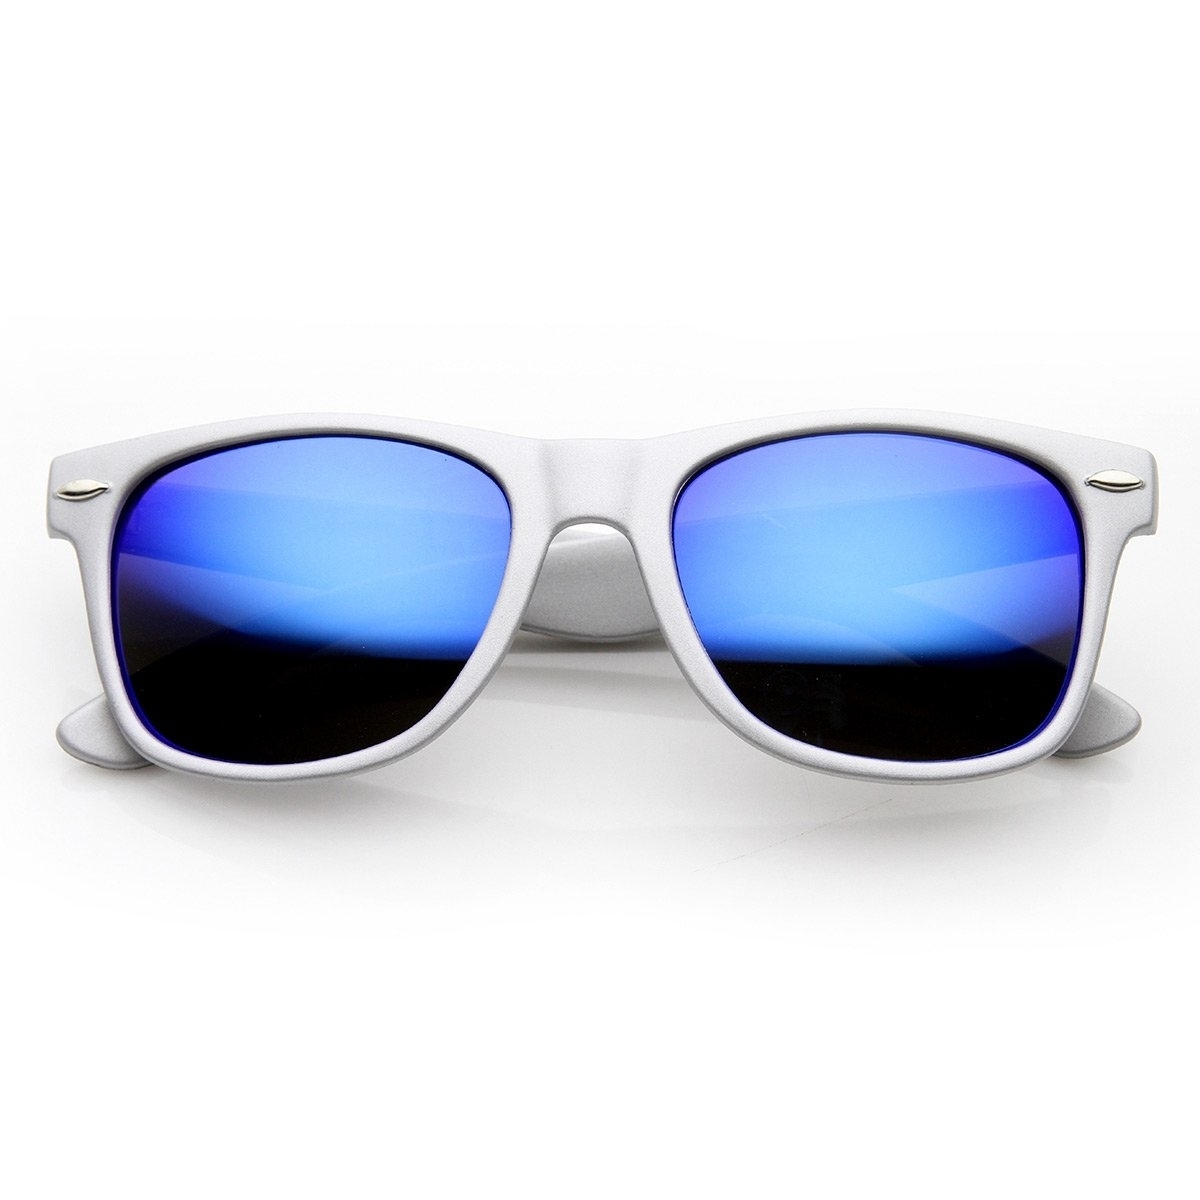 Classic Horn Rimmed Sunglasses With Flash Mirro Lens - Blue Ice